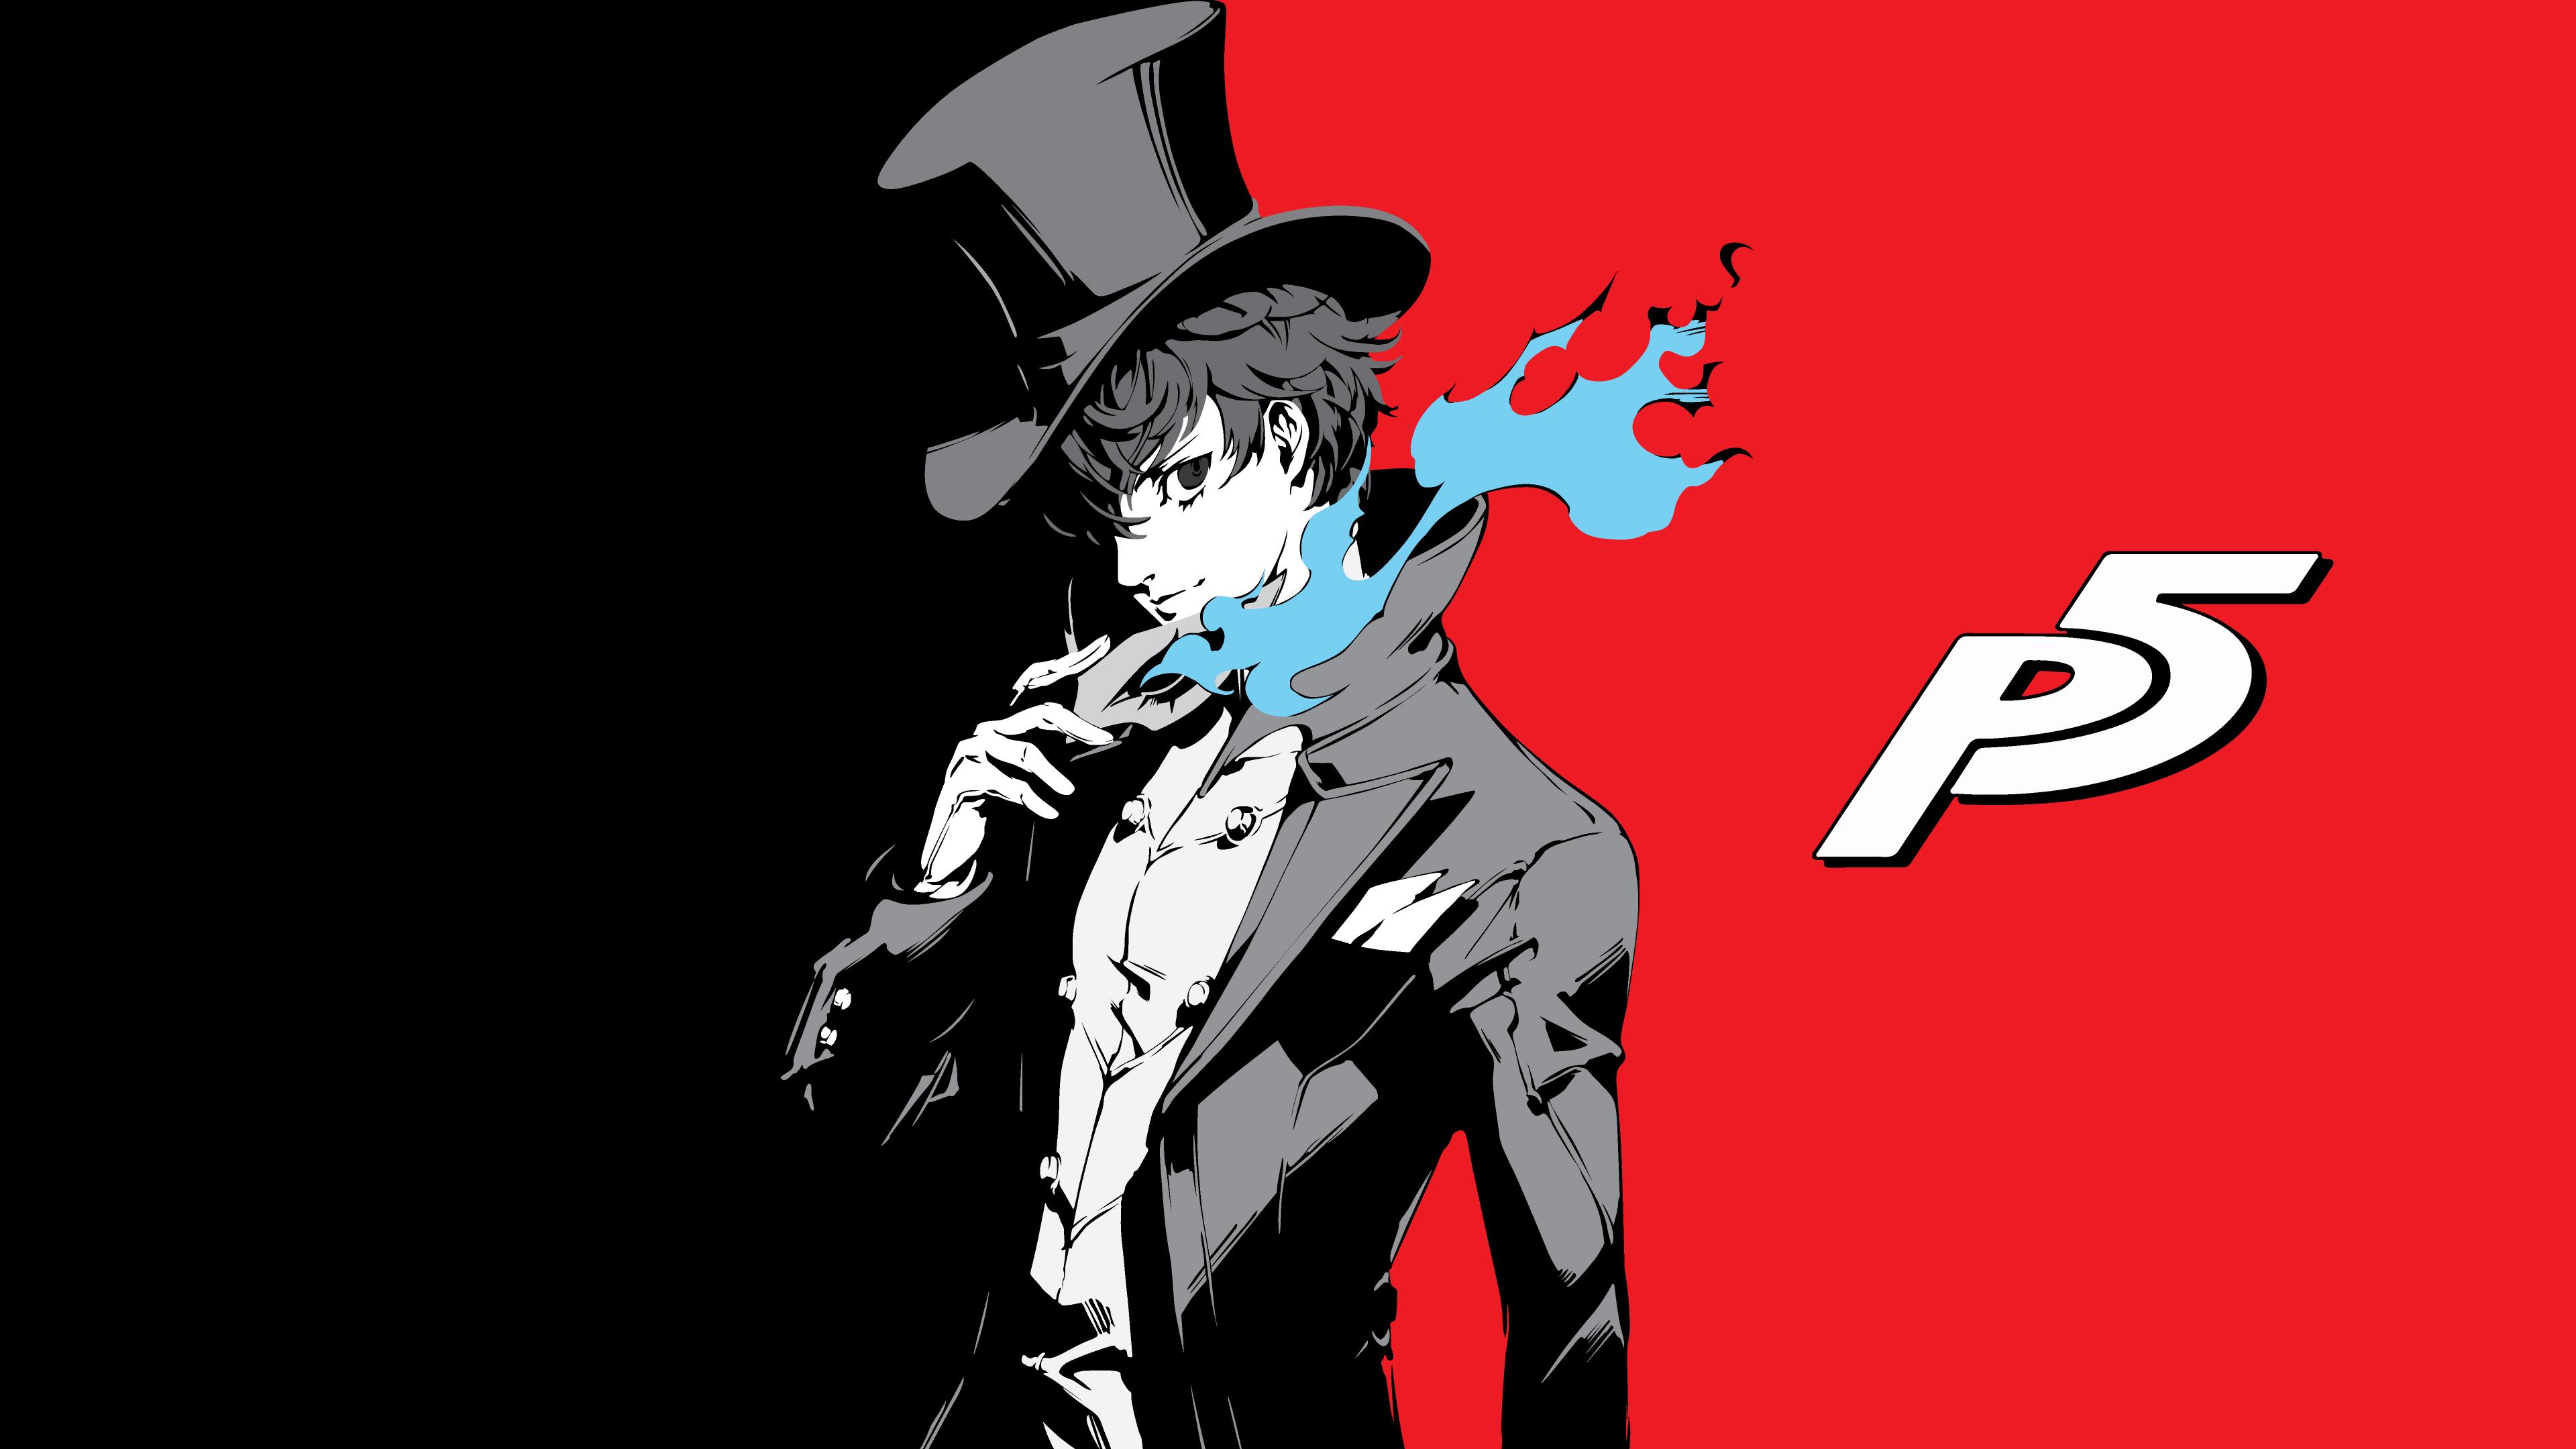 Persona 5 Wallpaper. HD Background Image